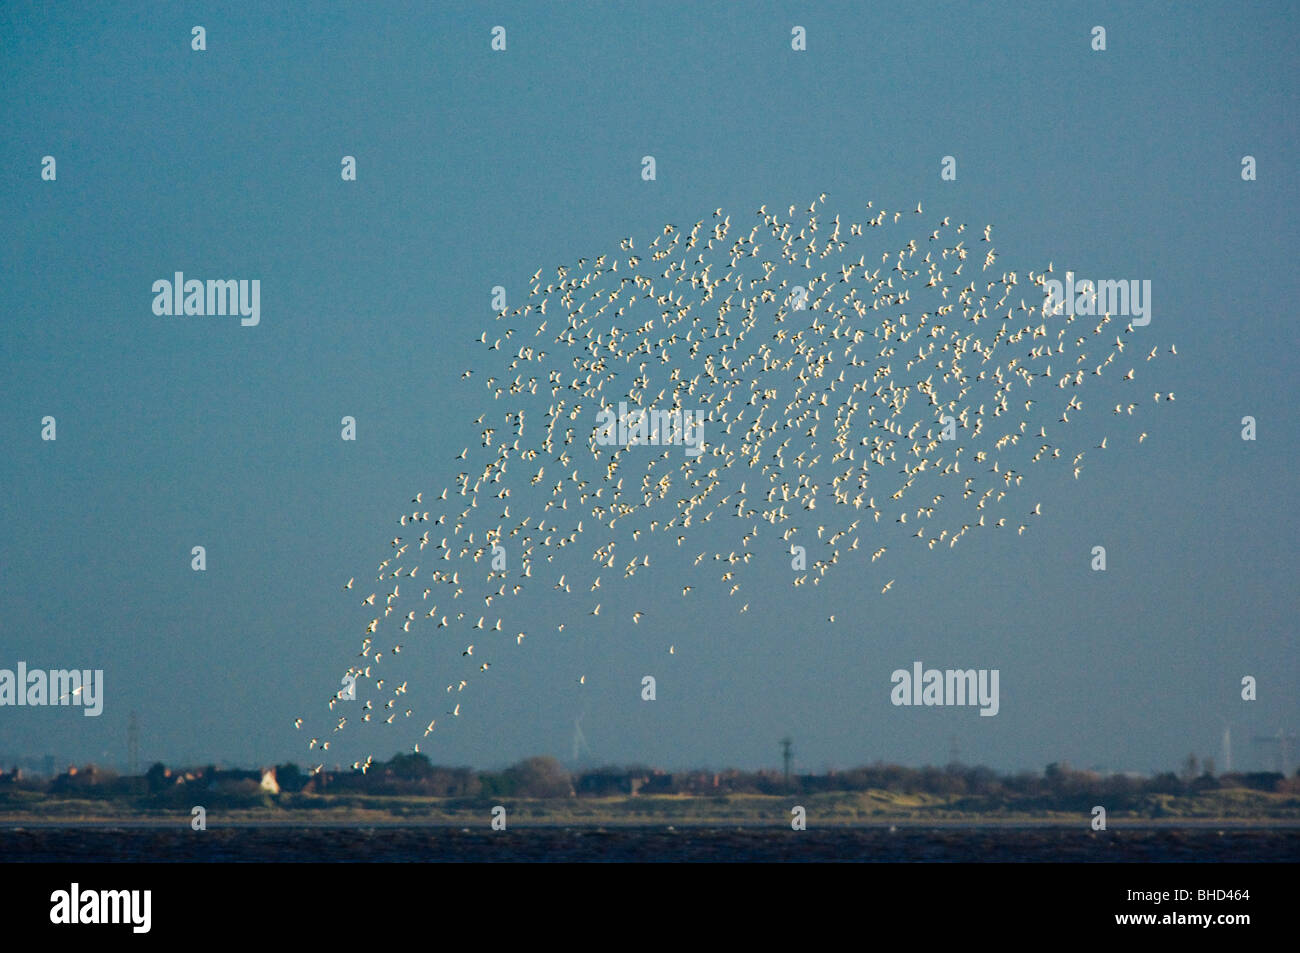 Flock of waders, mainly Knot (Calidris canutus), flying over the Dee estuary, Wales. Stock Photo